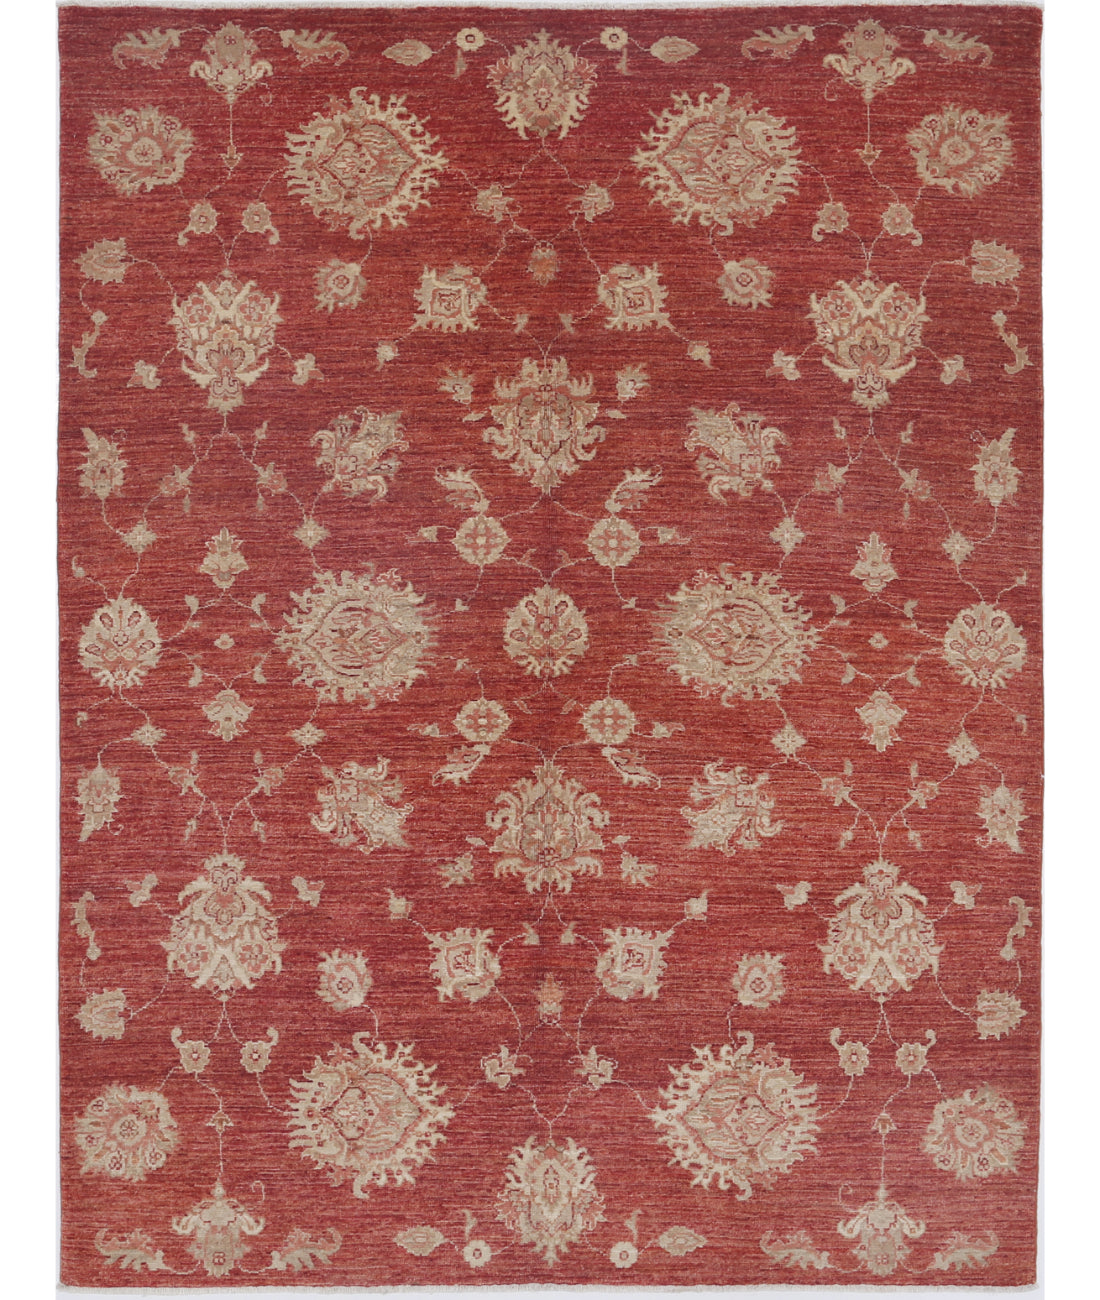 Hand Knotted Art &amp; Craft Wool Rug - 4&#39;10&#39;&#39; x 6&#39;6&#39;&#39; 4&#39;10&#39;&#39; x 6&#39;6&#39;&#39; (145 X 195) / Red / Red